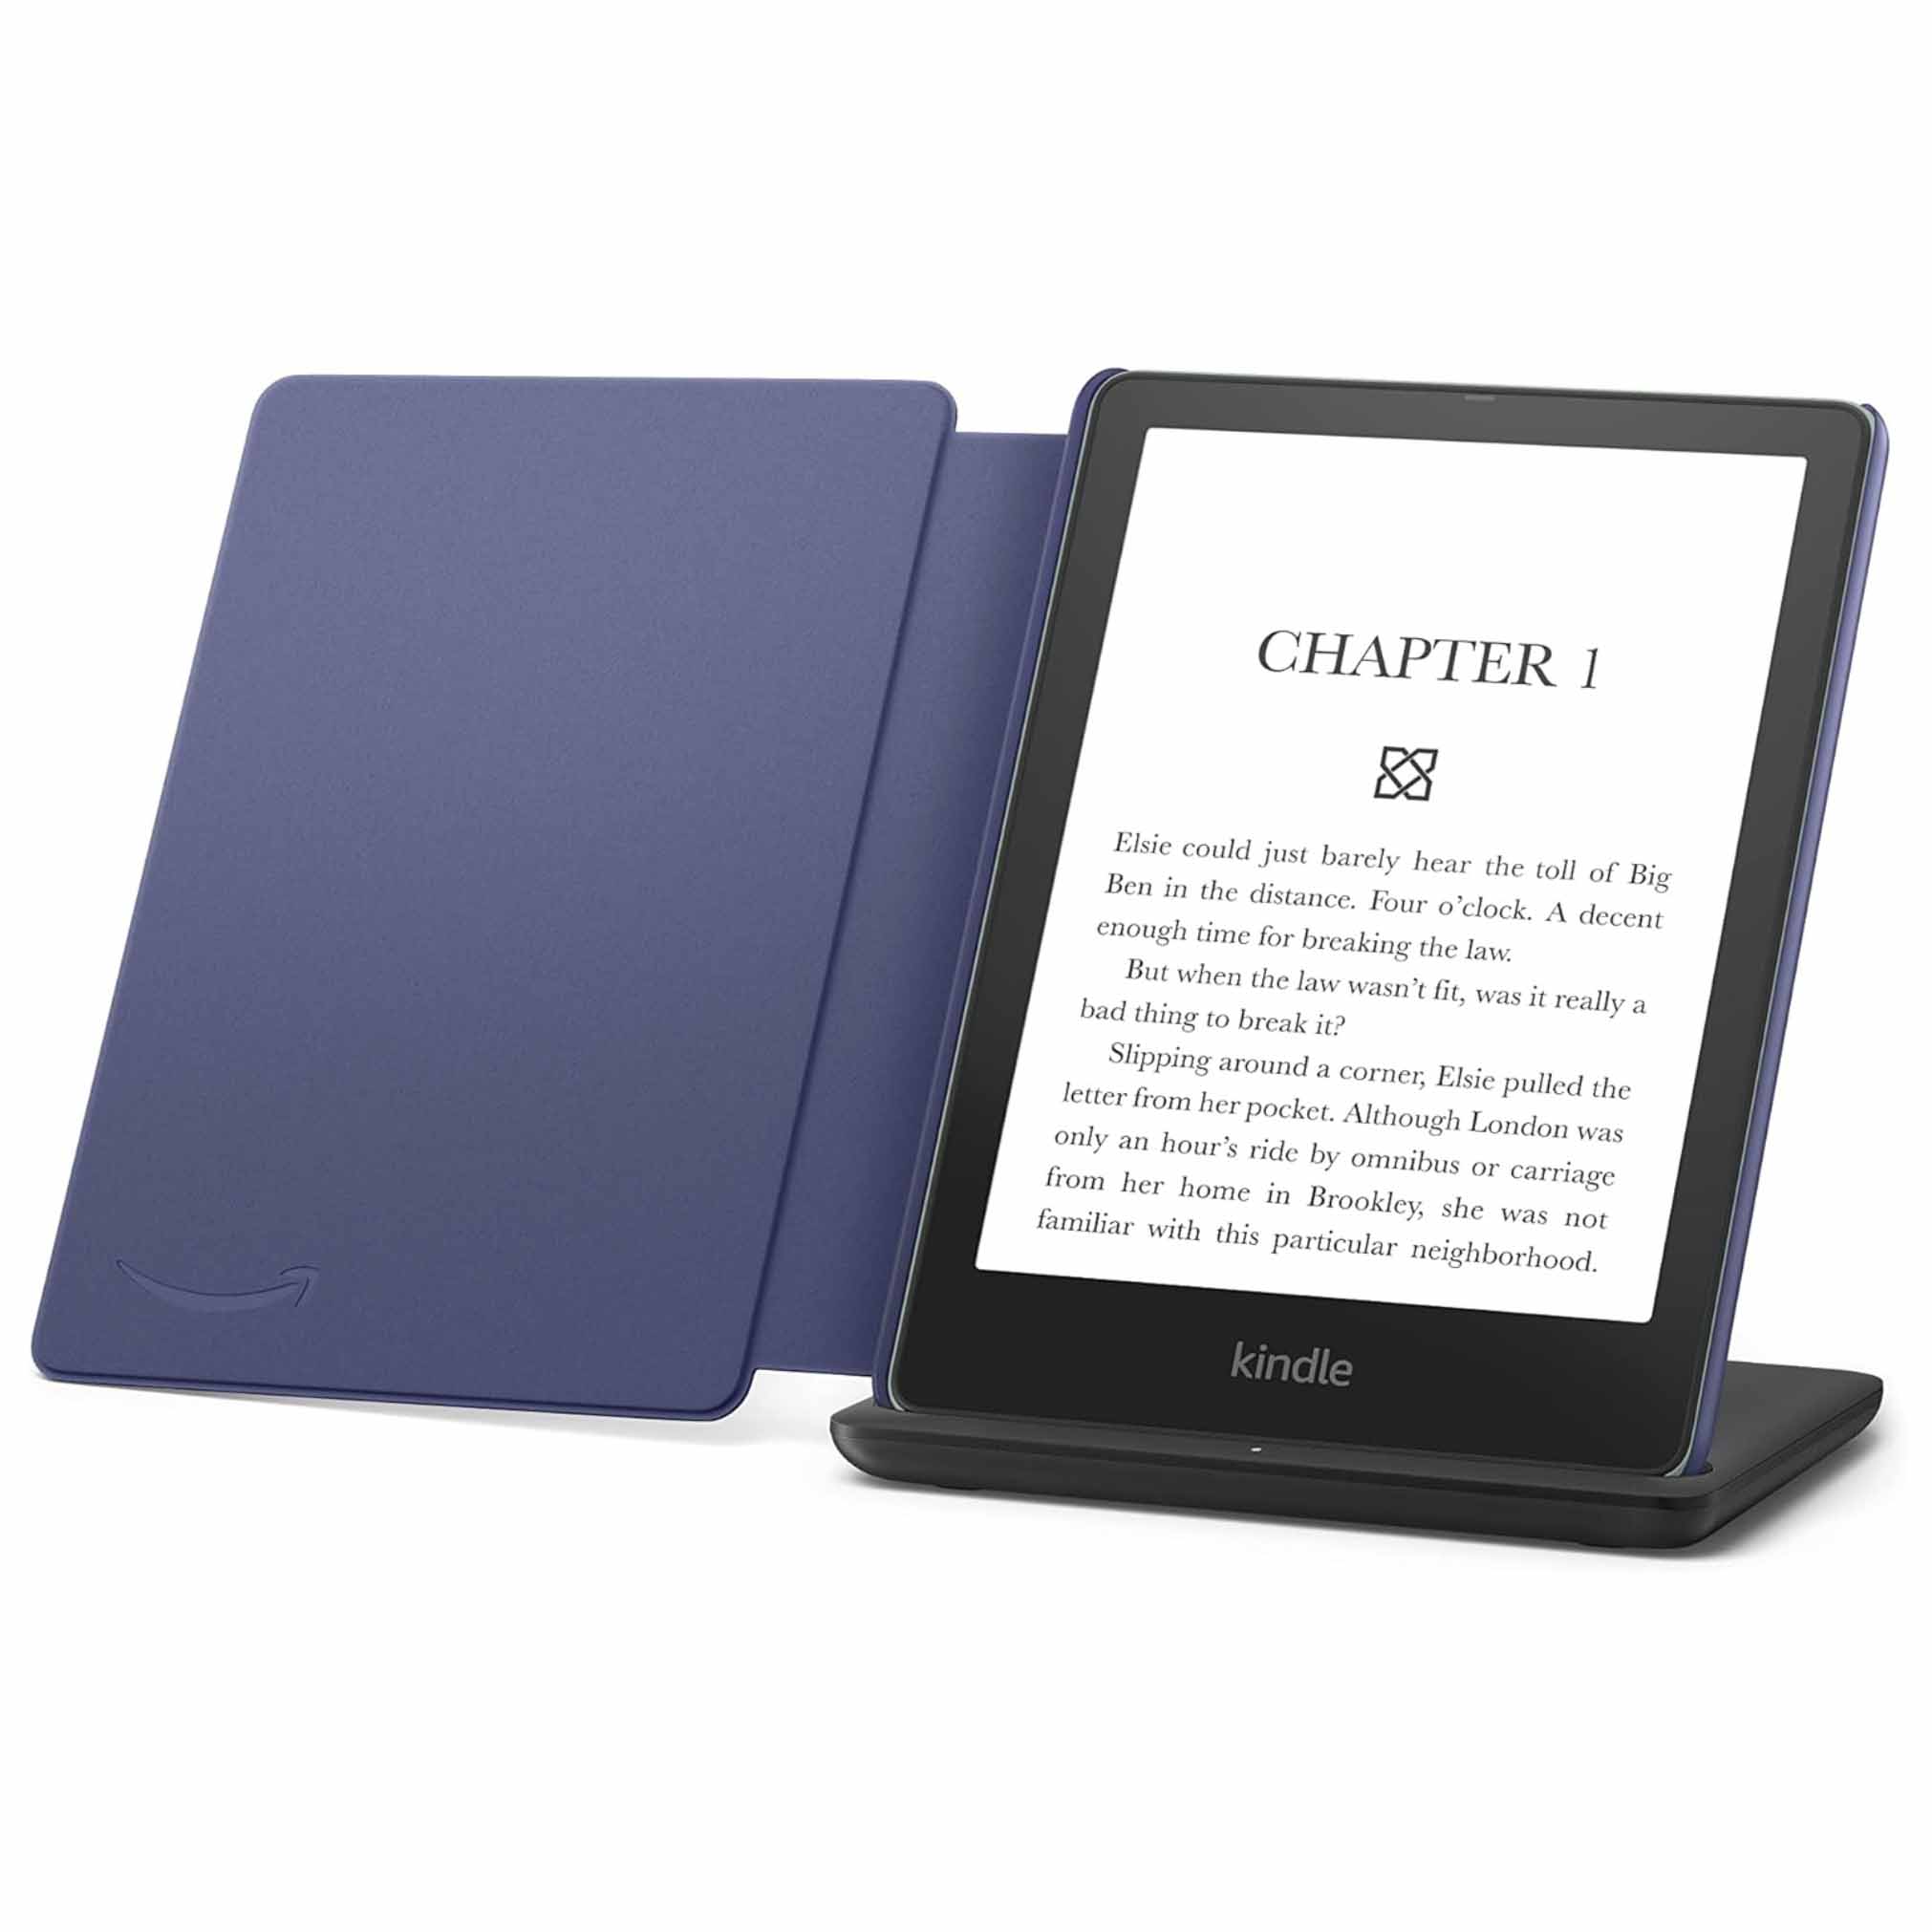 Black kindle on a stand with blue cover